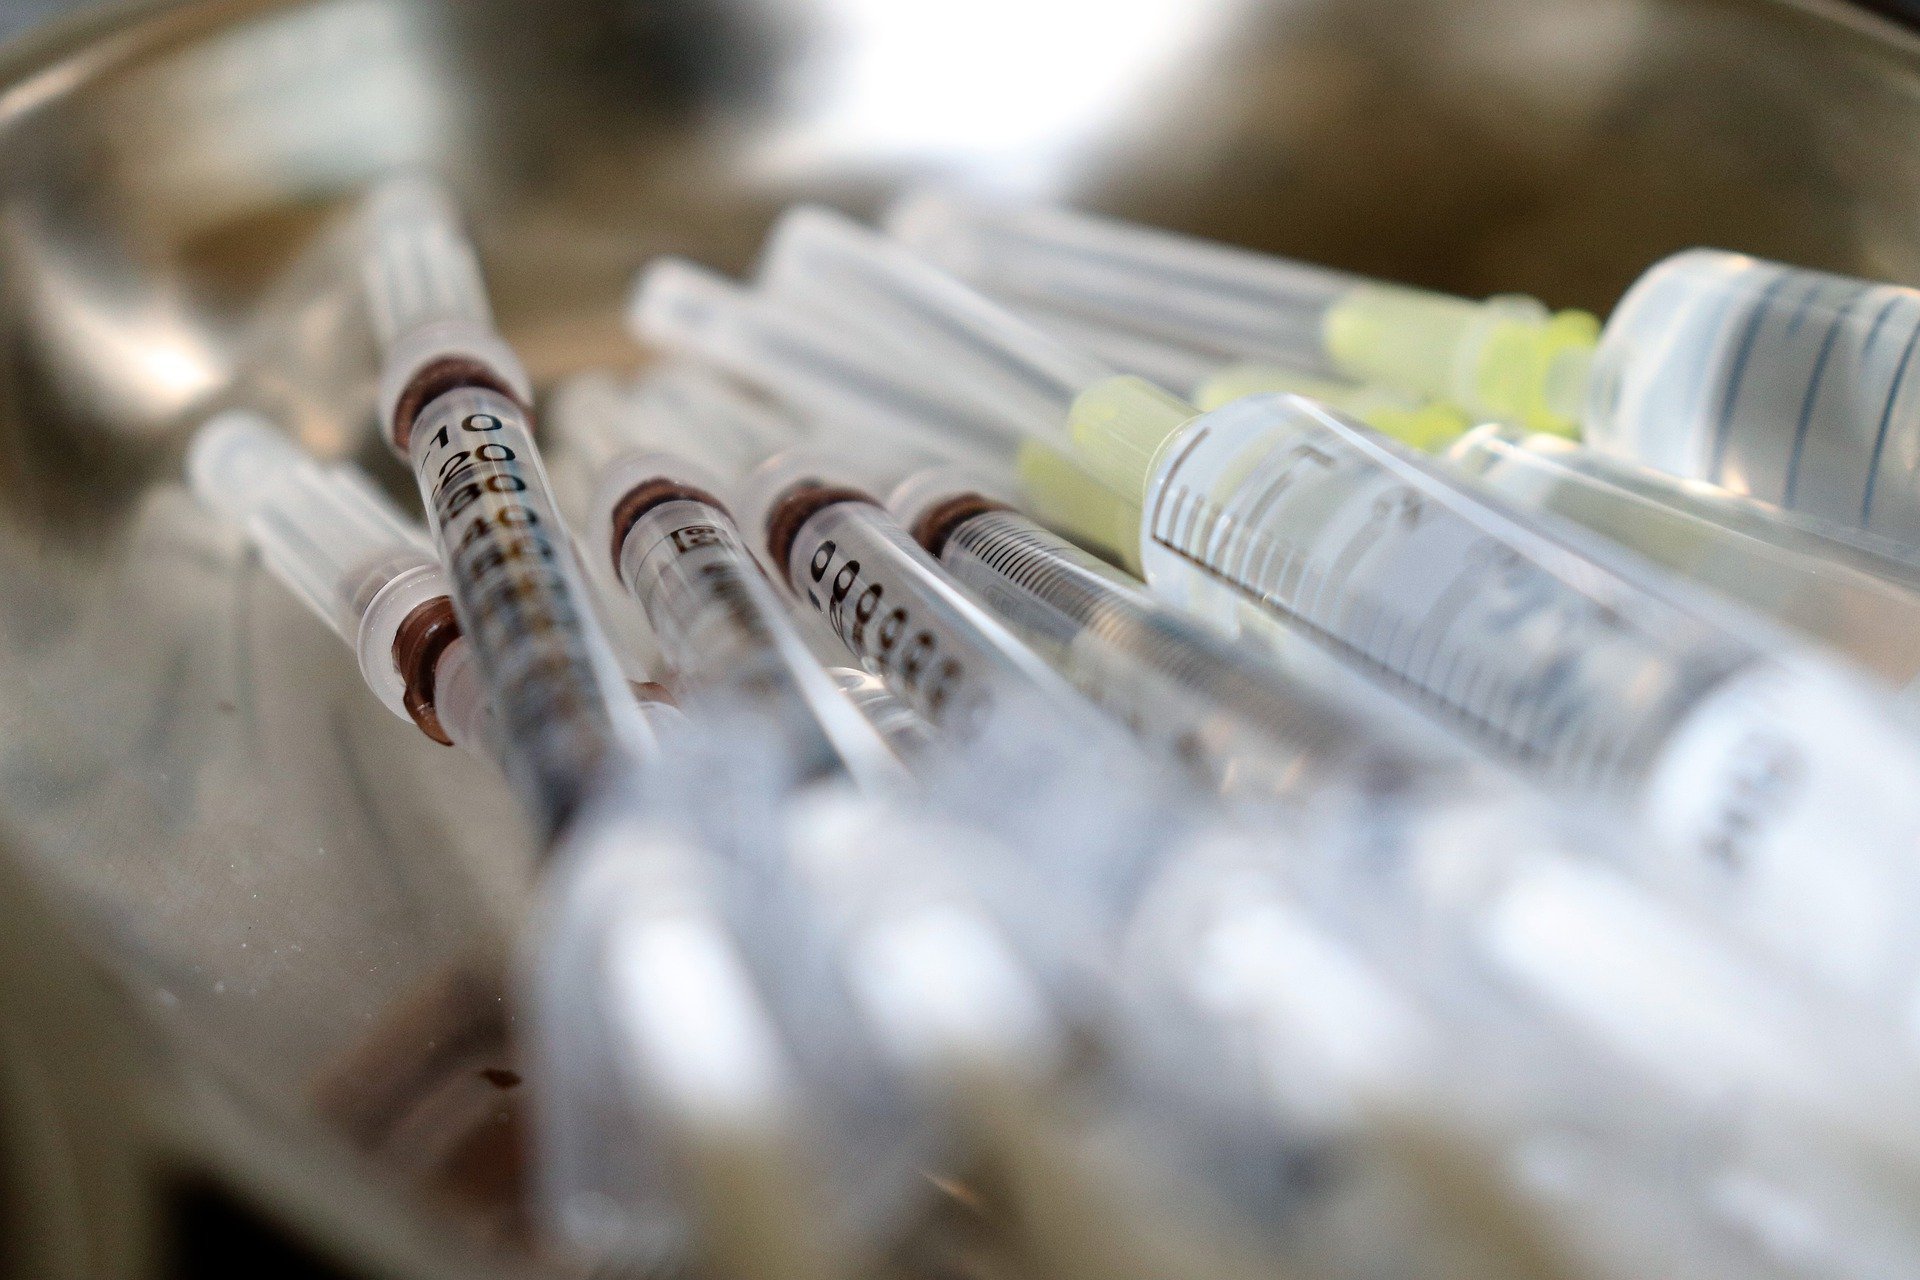 picture of syringes